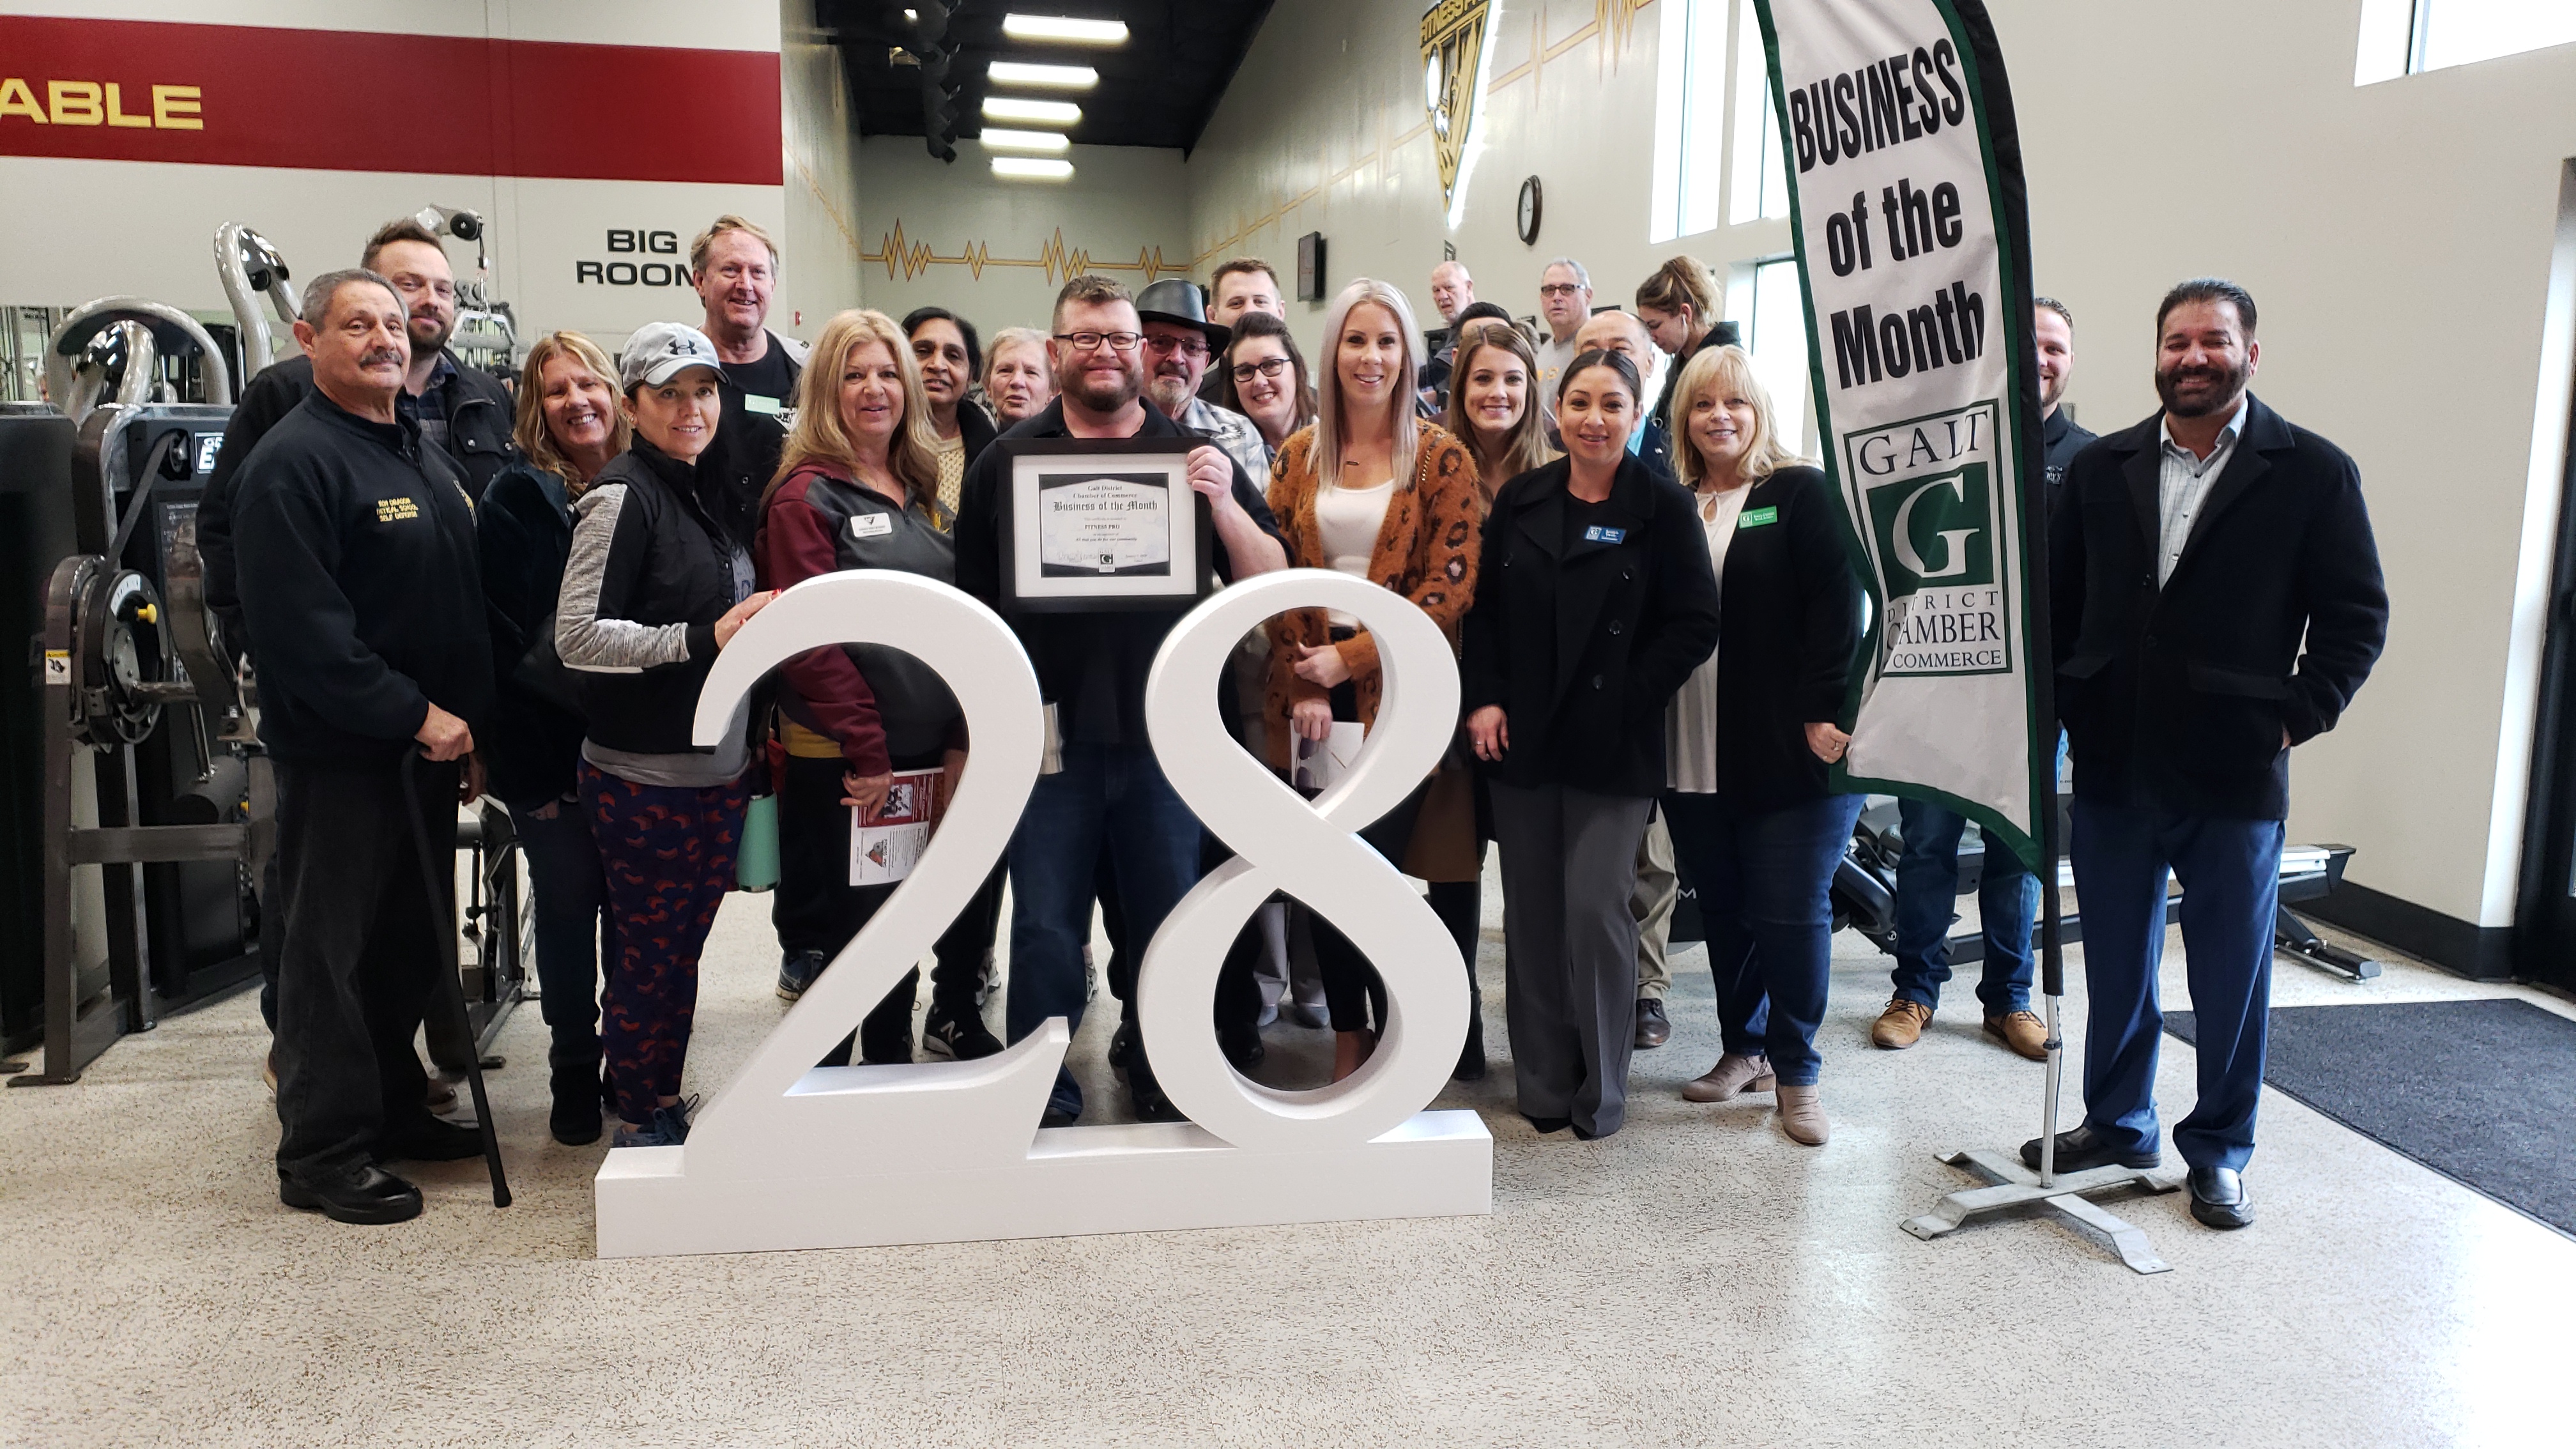 Fitness Pro Award Photo; Business of the Month for January 2020